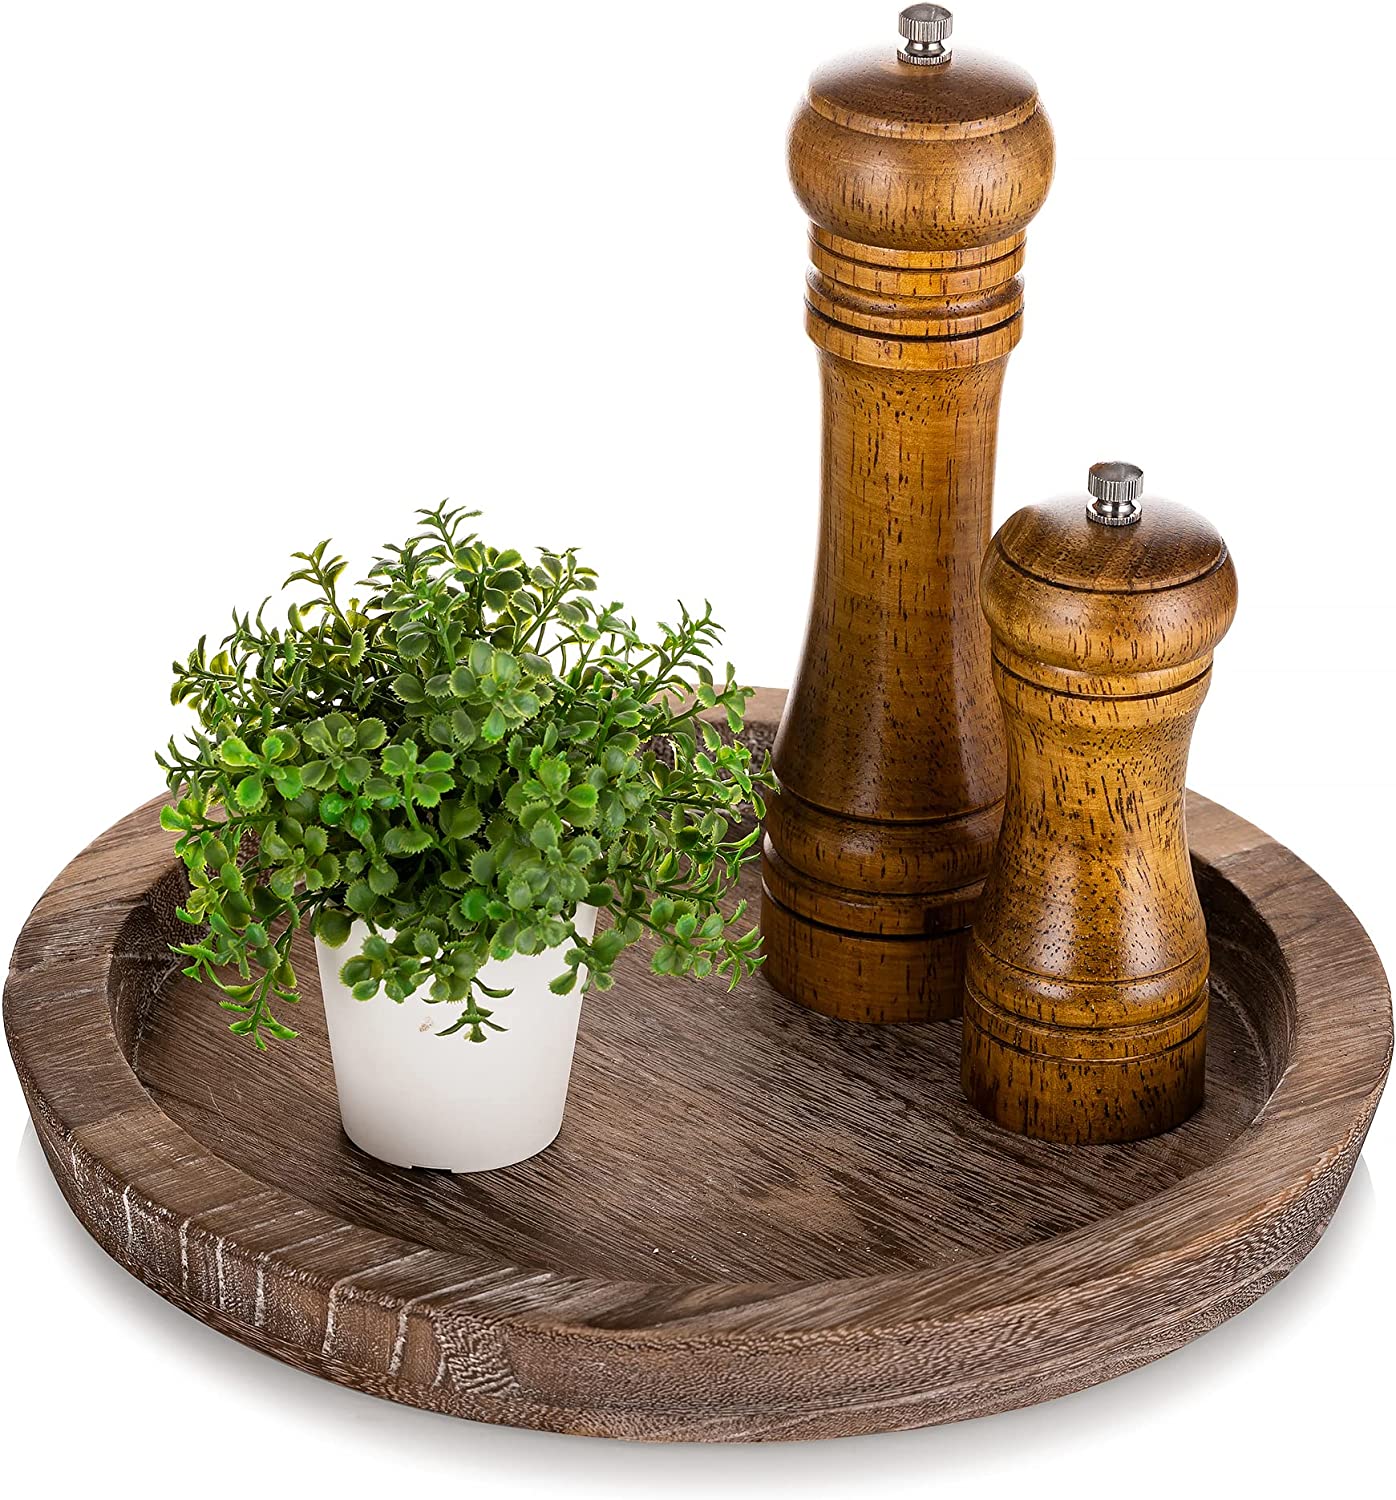 Wooden Serving Tray - Round Wood Butler Decorative Tray Vintage Center piece Candle Holder Trays